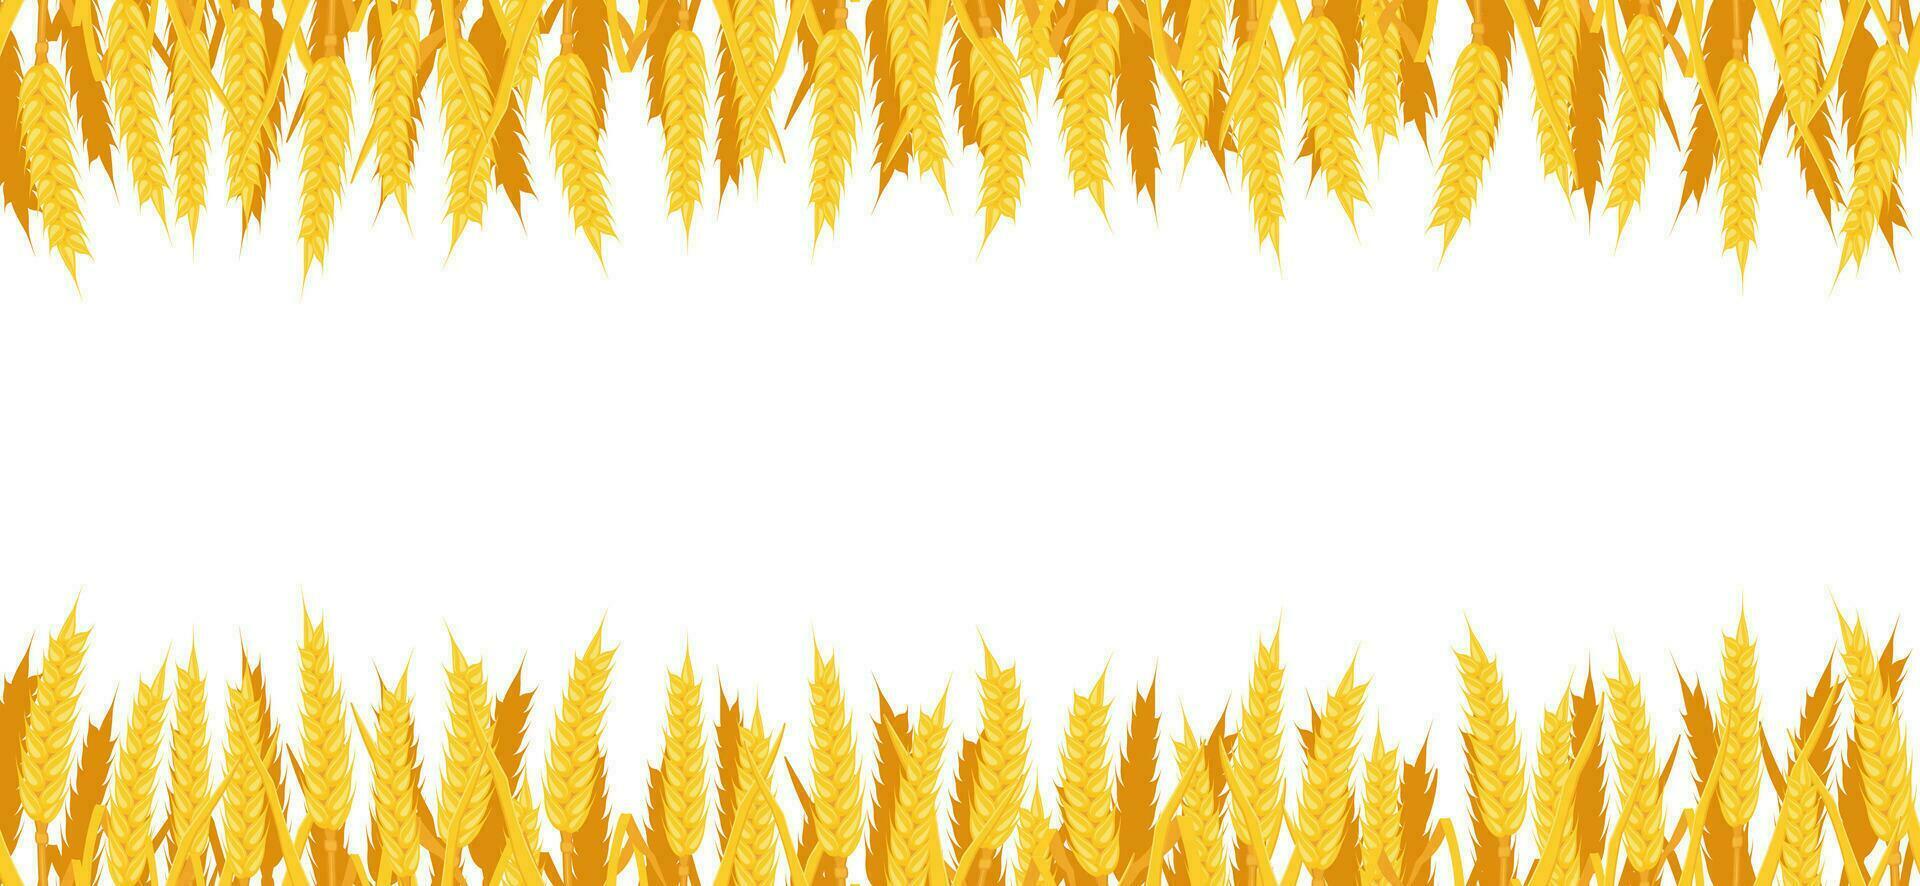 Vector seamless background of wheat. Border with yellow spikes. Autumn frame with cereal vegetation